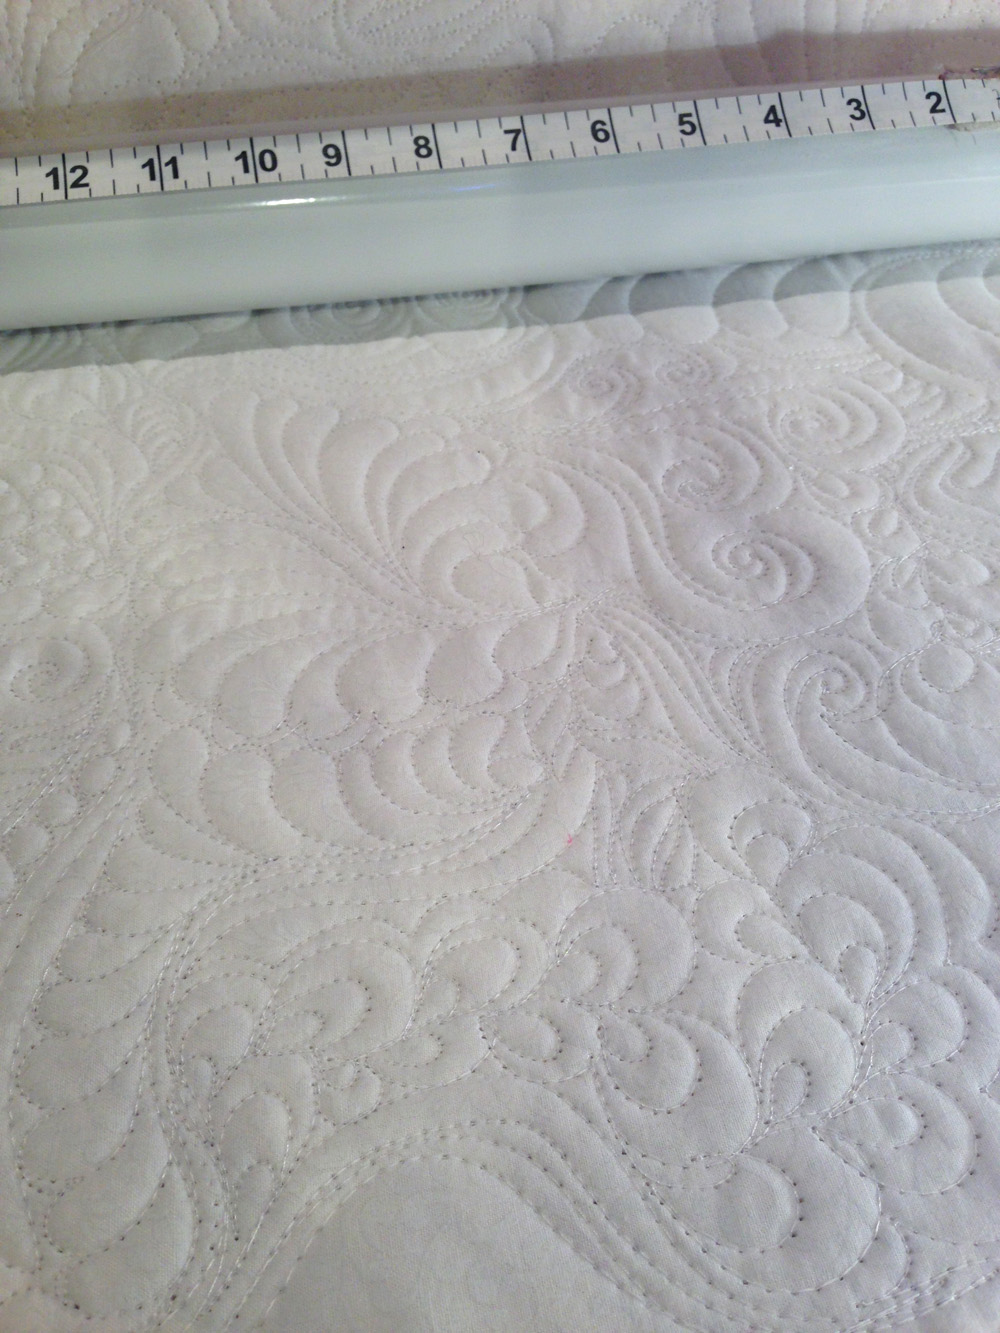 Here is some of my practice work using the McTavishing technique on my longarm.